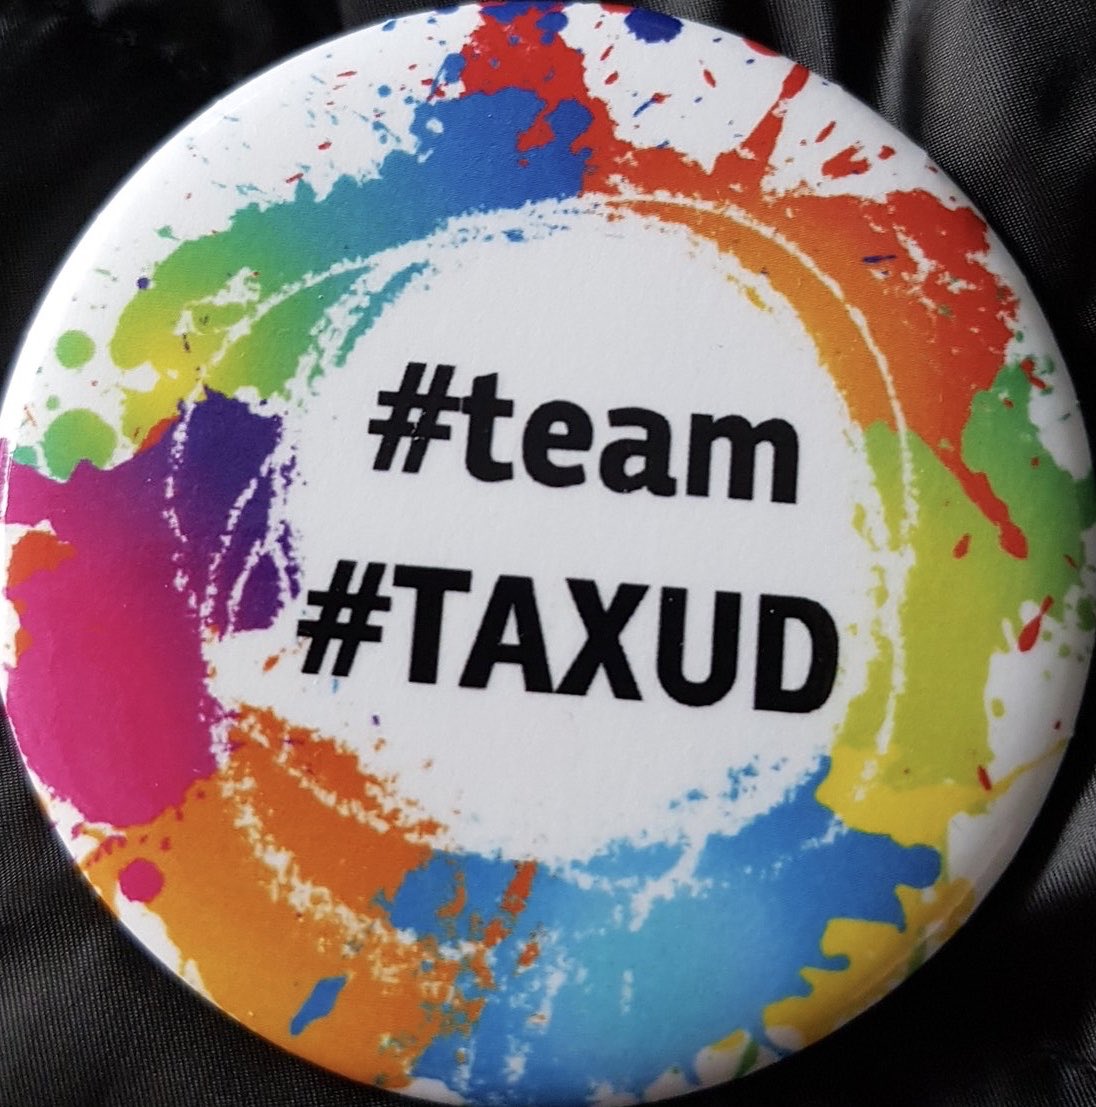 Honestly, it’s been a blast. I’ve had the privilege of leading a truly great team of people in  @EU_Taxud. Great expertise, highly committed professionals, and a real family atmosphere, too. A million thanks,  #teamTAXUD /2